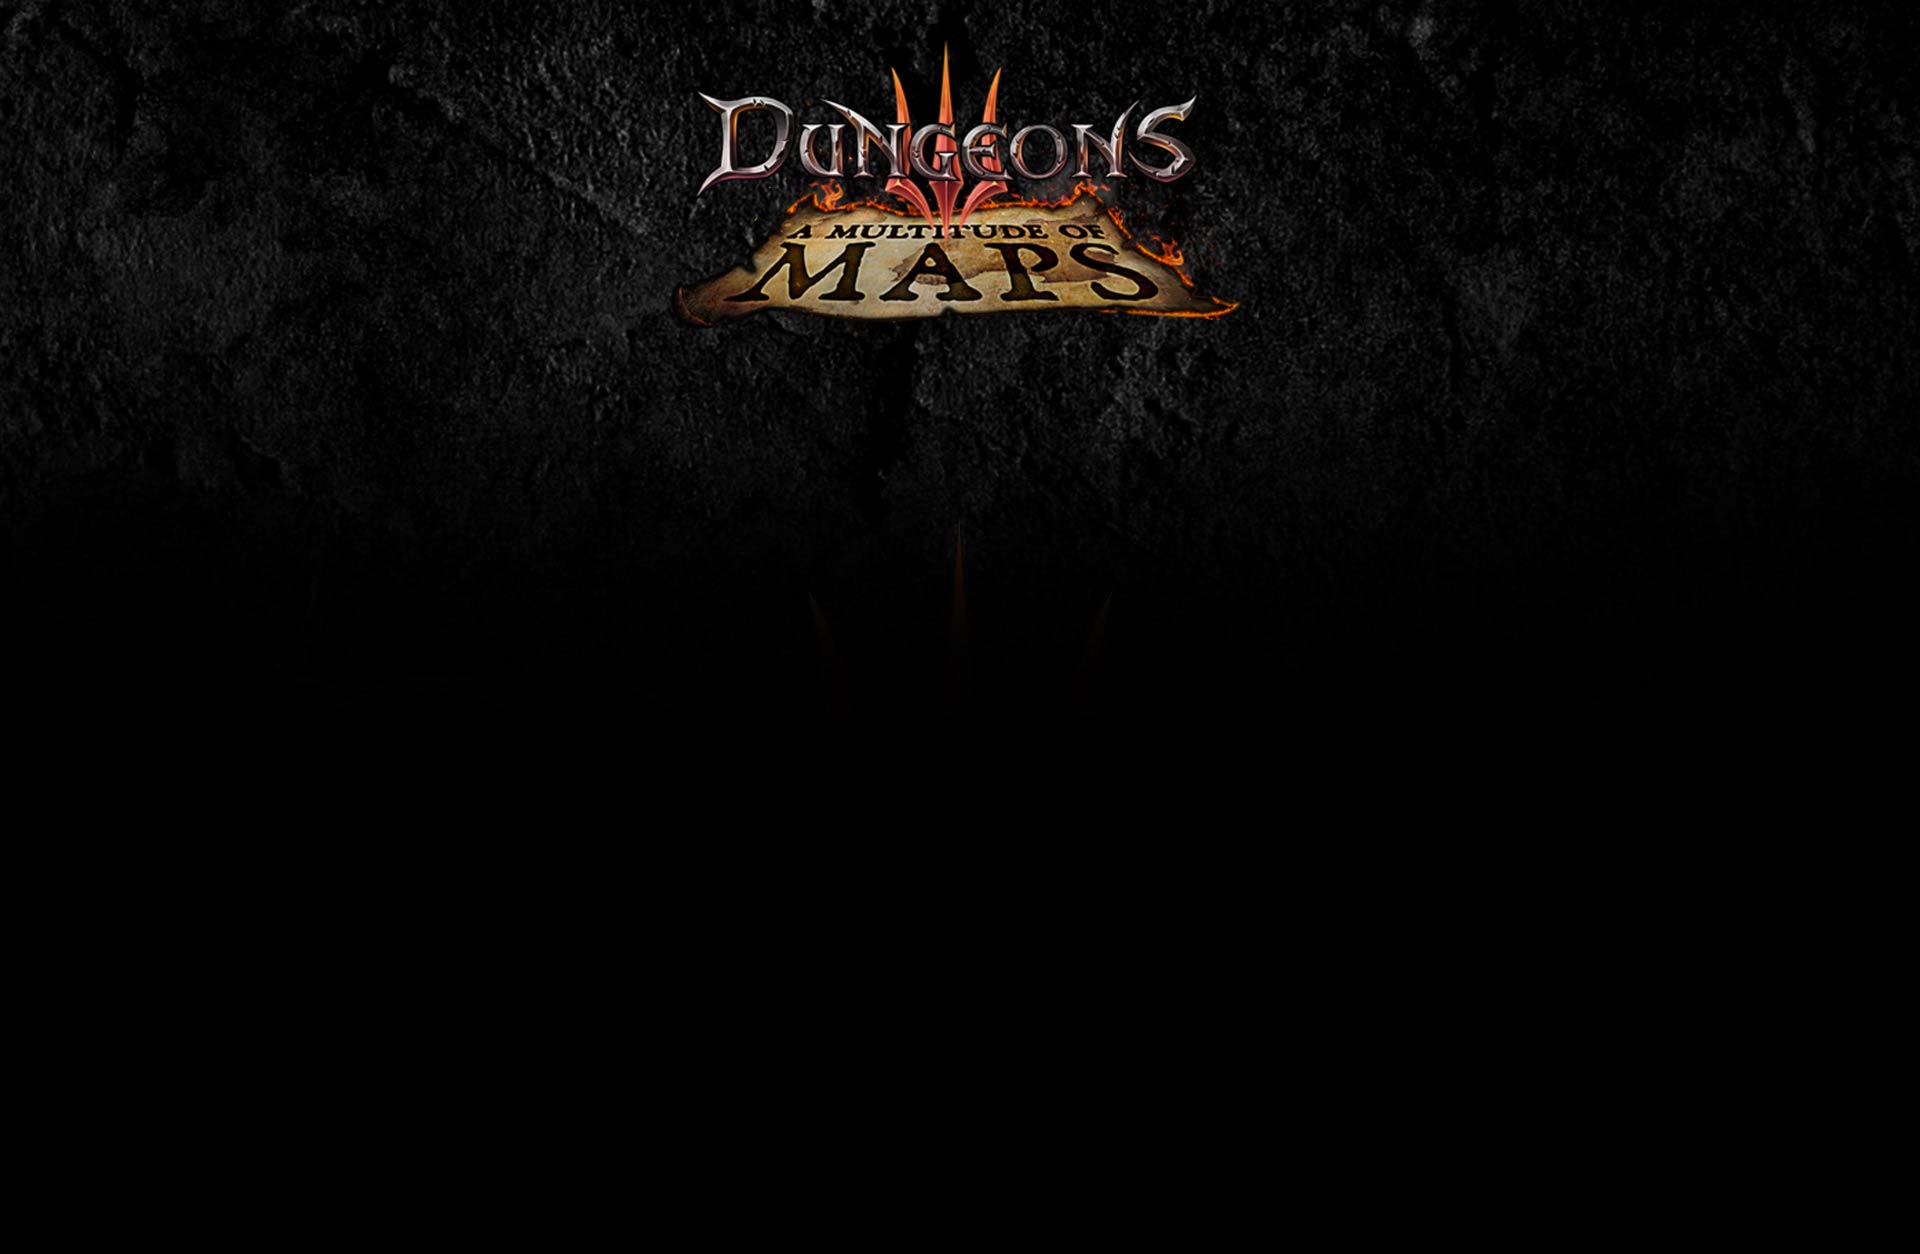 Dungeons 3 - A Multitude of Maps